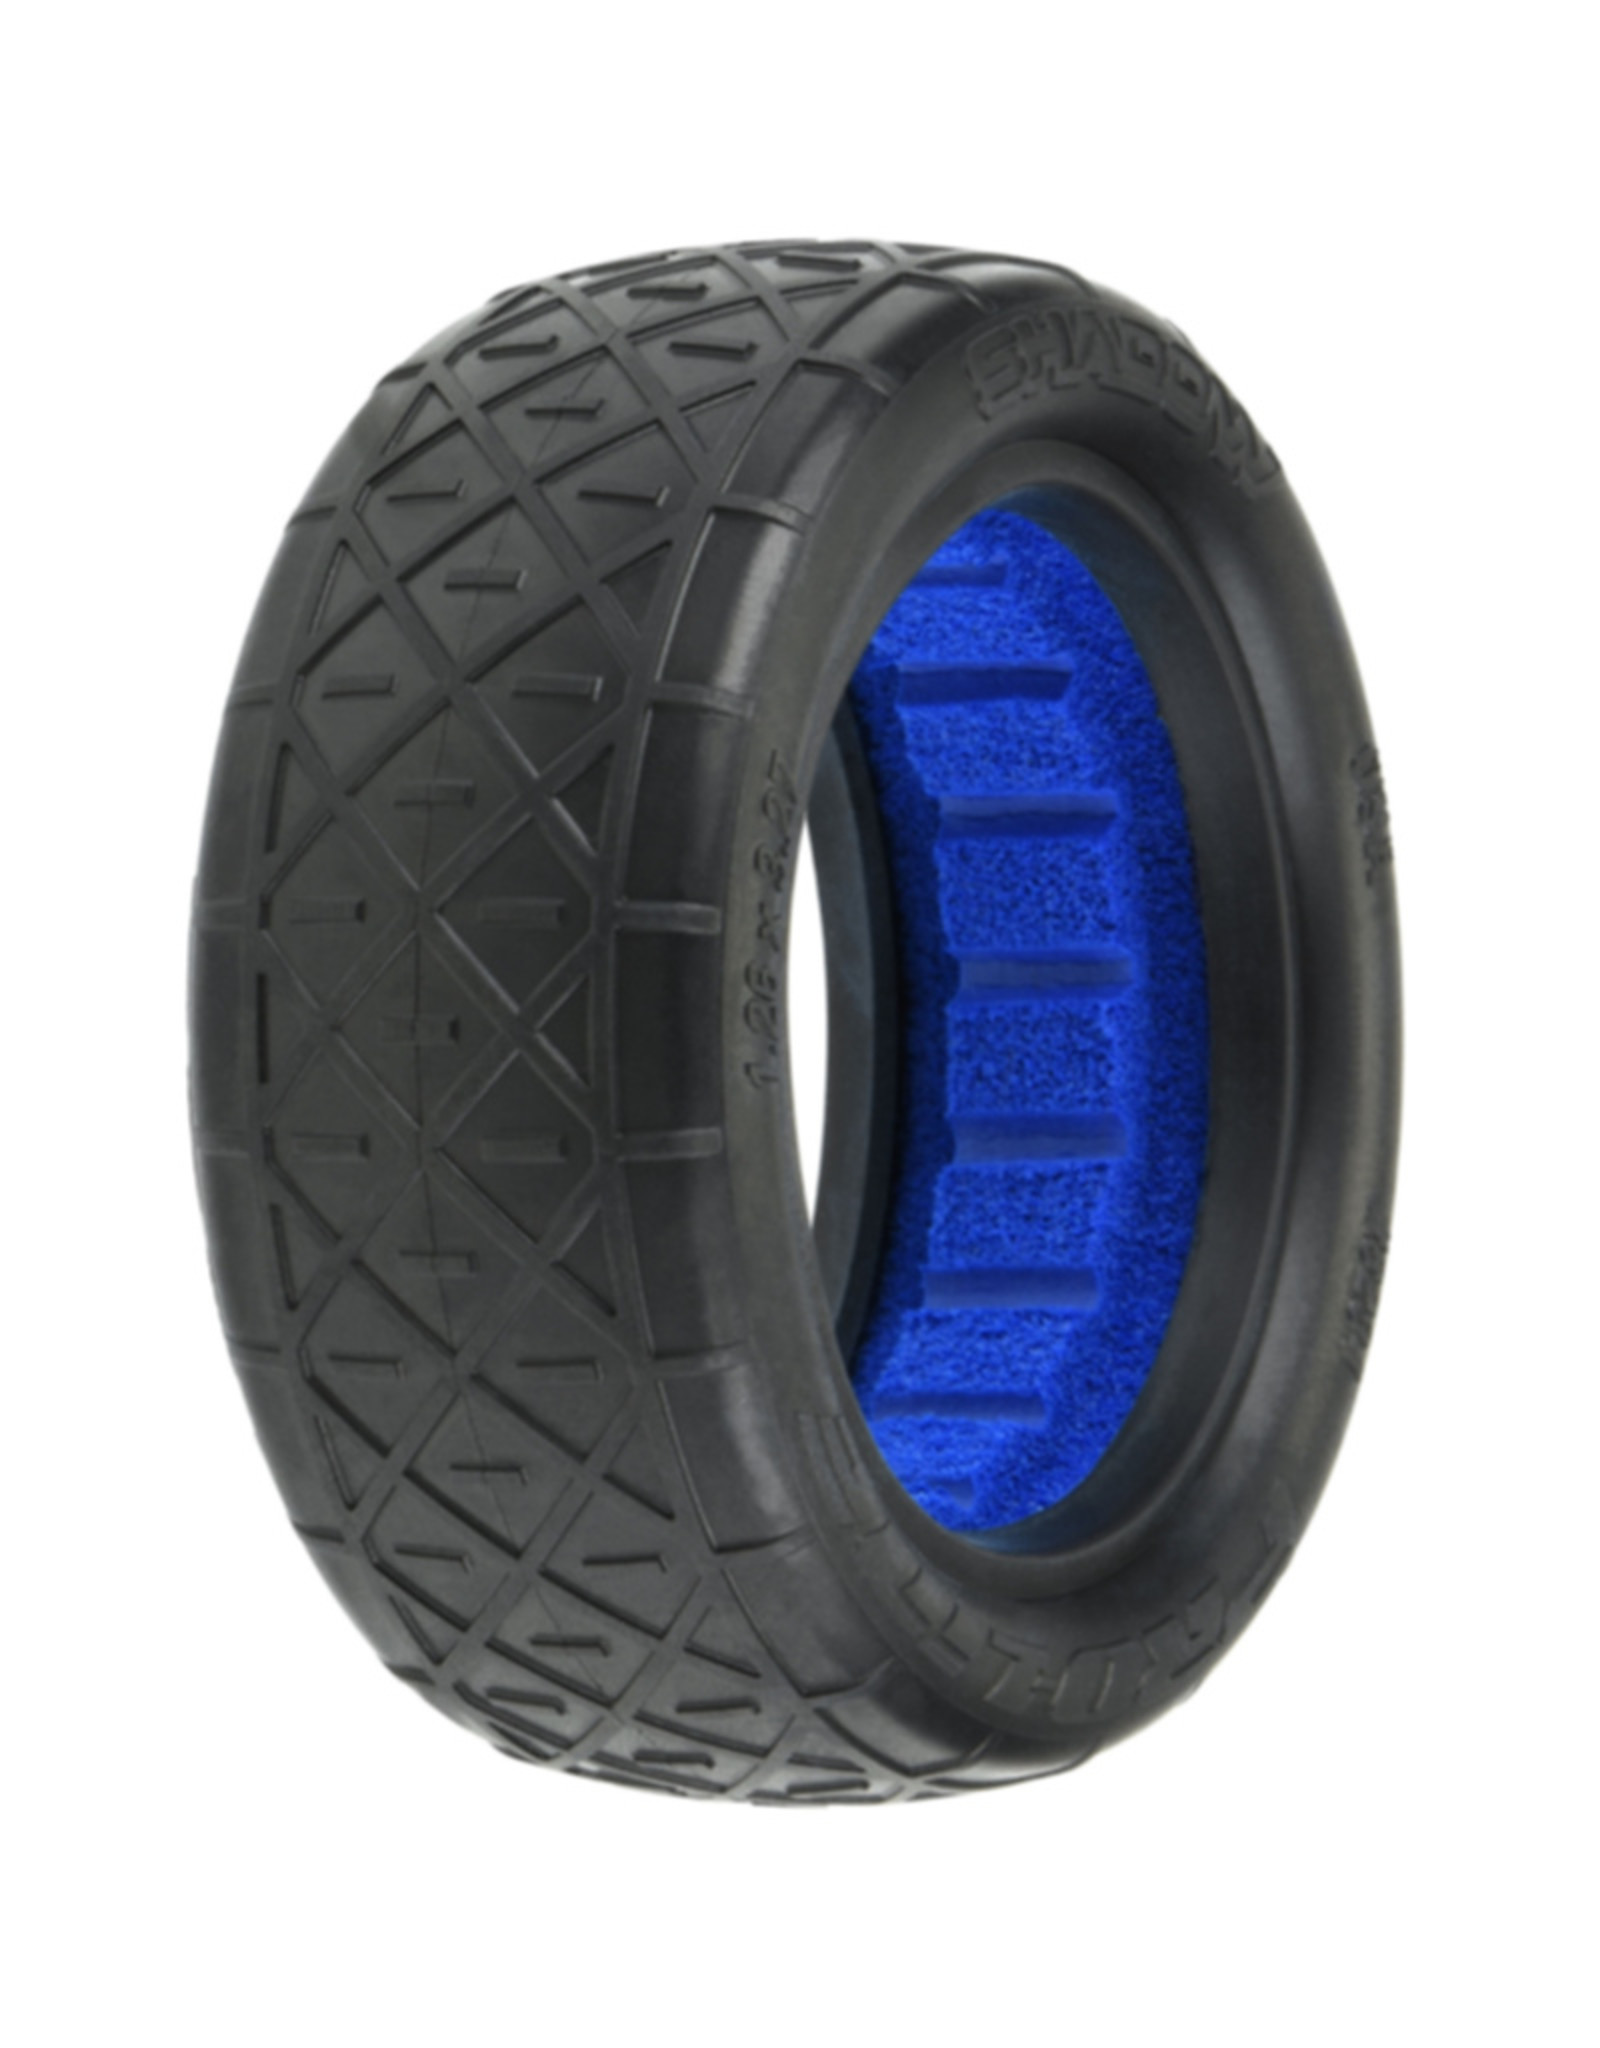 Pro-Line Racing PRO8294204 Shadow 2.2" 4WD S4 Buggy Front Tires (2)